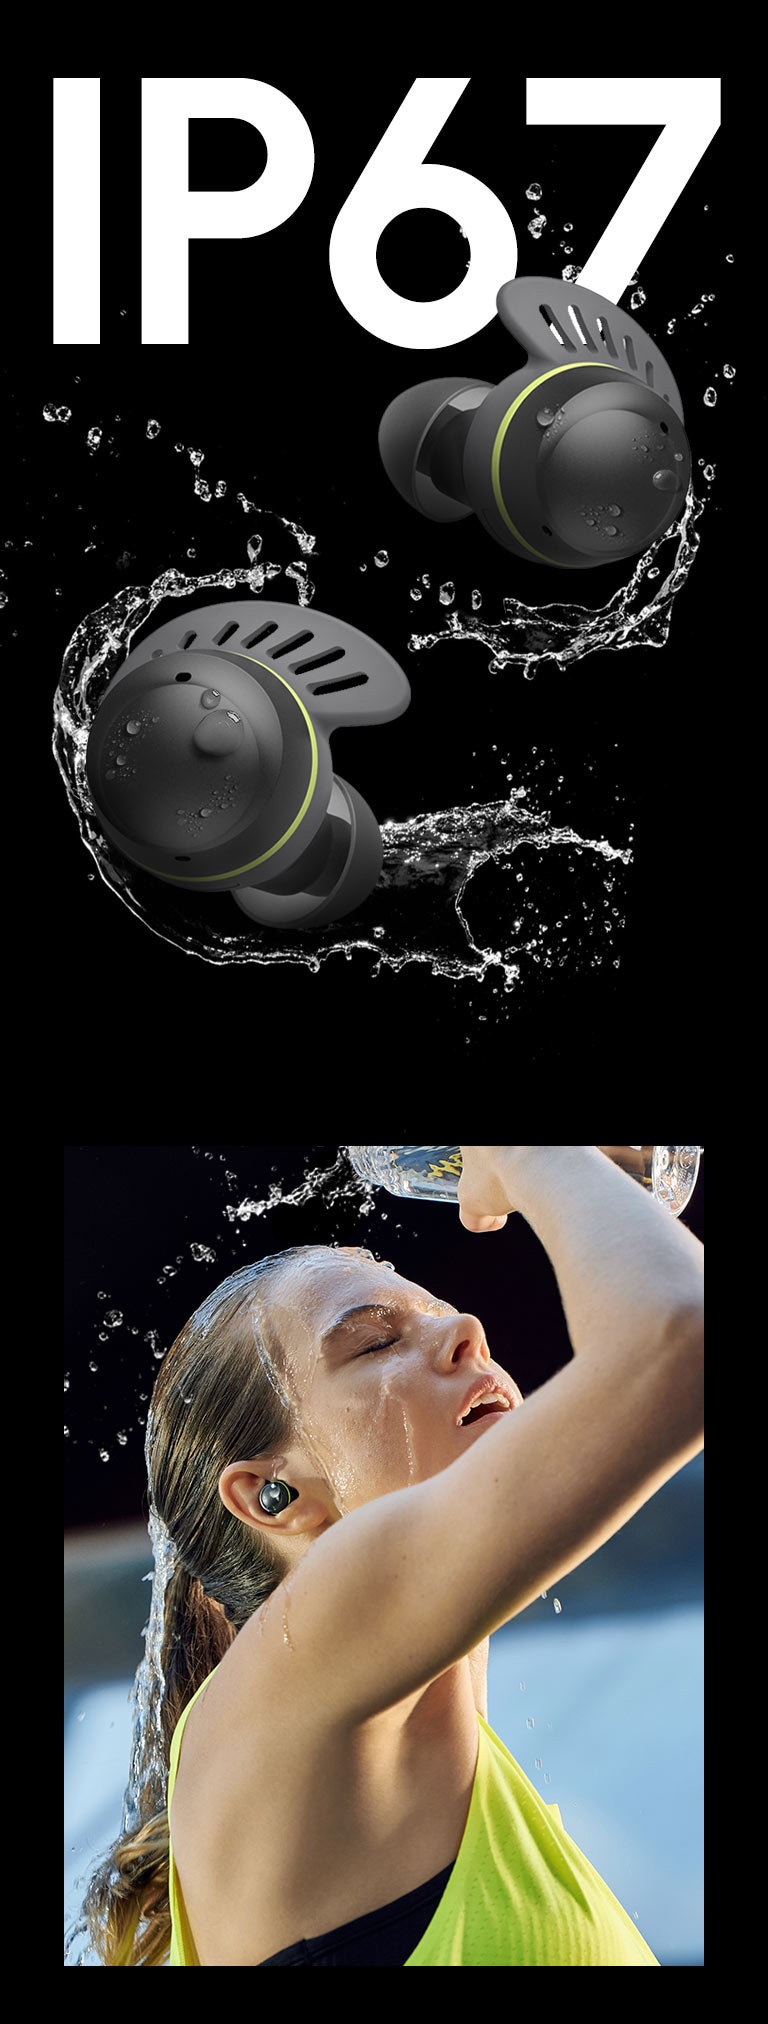 TONE Free fit earbuds in front of text saying IP67. The earbuds are surrounded by water and water droplets.  A woman with her hair tied up is shown on the left, wearing a TONE Free fit product, pouring water on her face, and a man's hand washing the TONE Free fit earbuds with water is shown on the right.